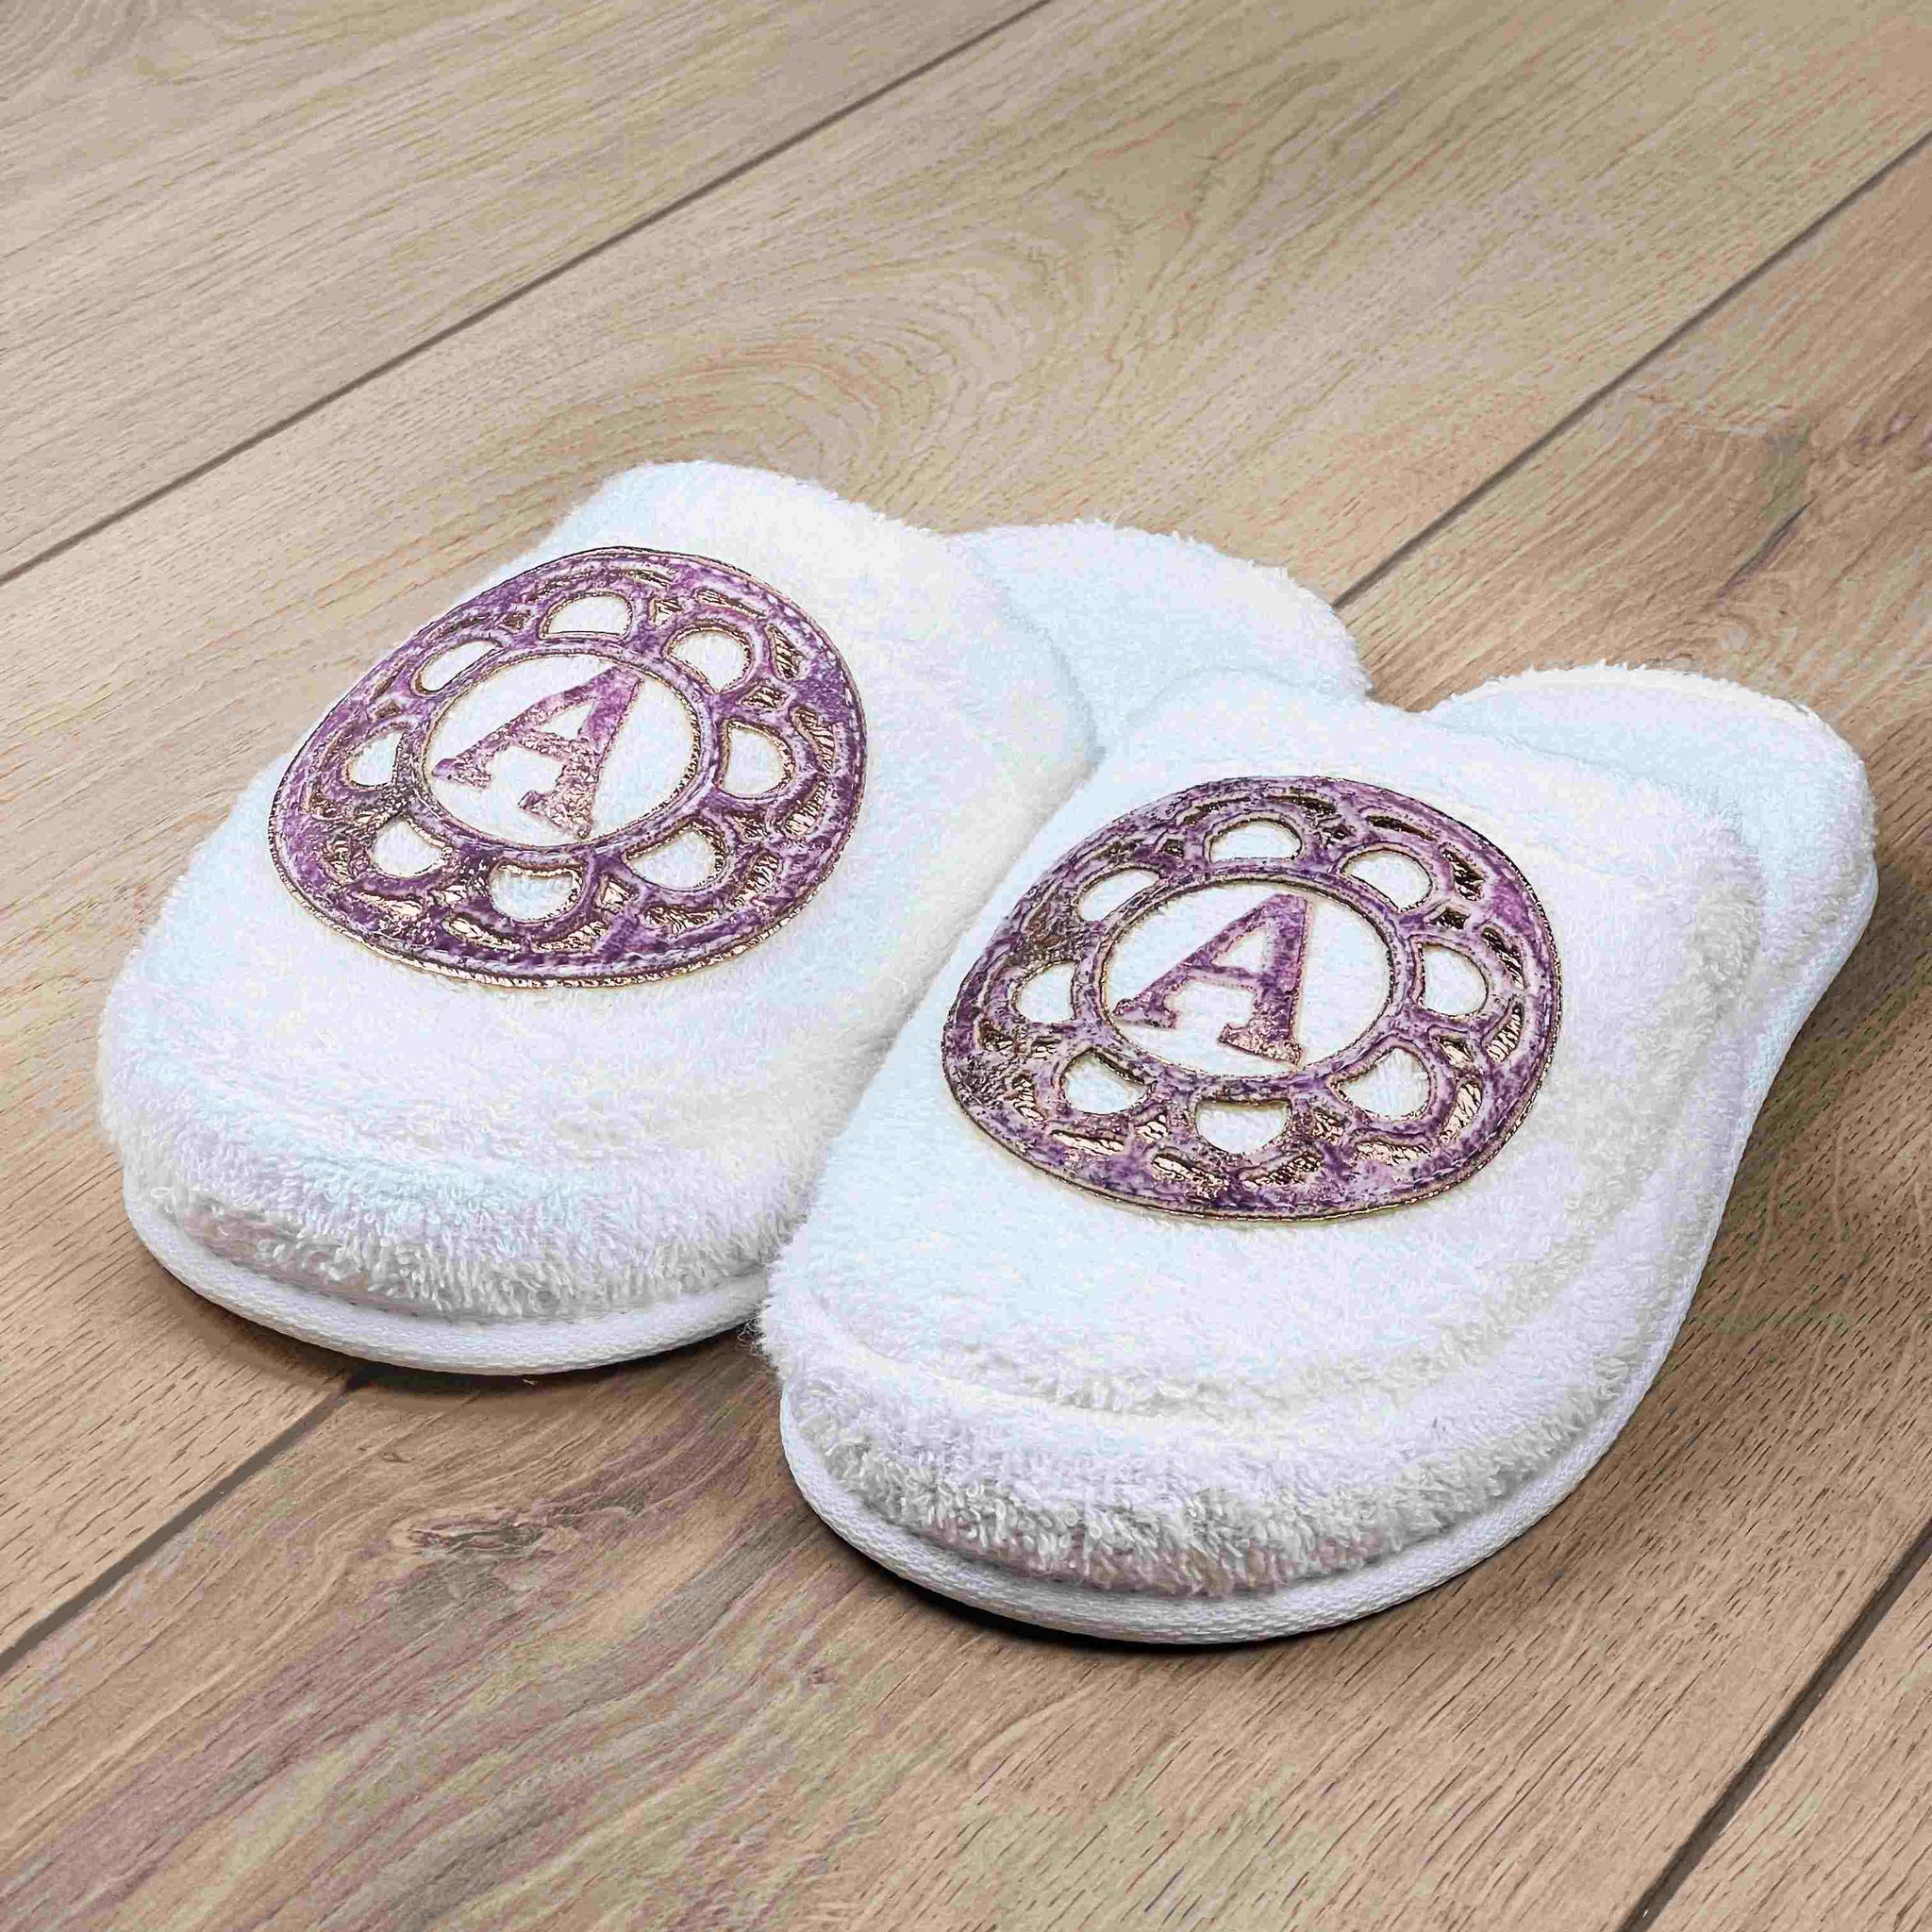 Lyra Women's Custom Initial Slippers, Soft House & Spa Terry Slippers by Creative Home,SLPW-CH-LYRA-EcPi-3738,SLPW-CH-LYRA-EcPi-3940